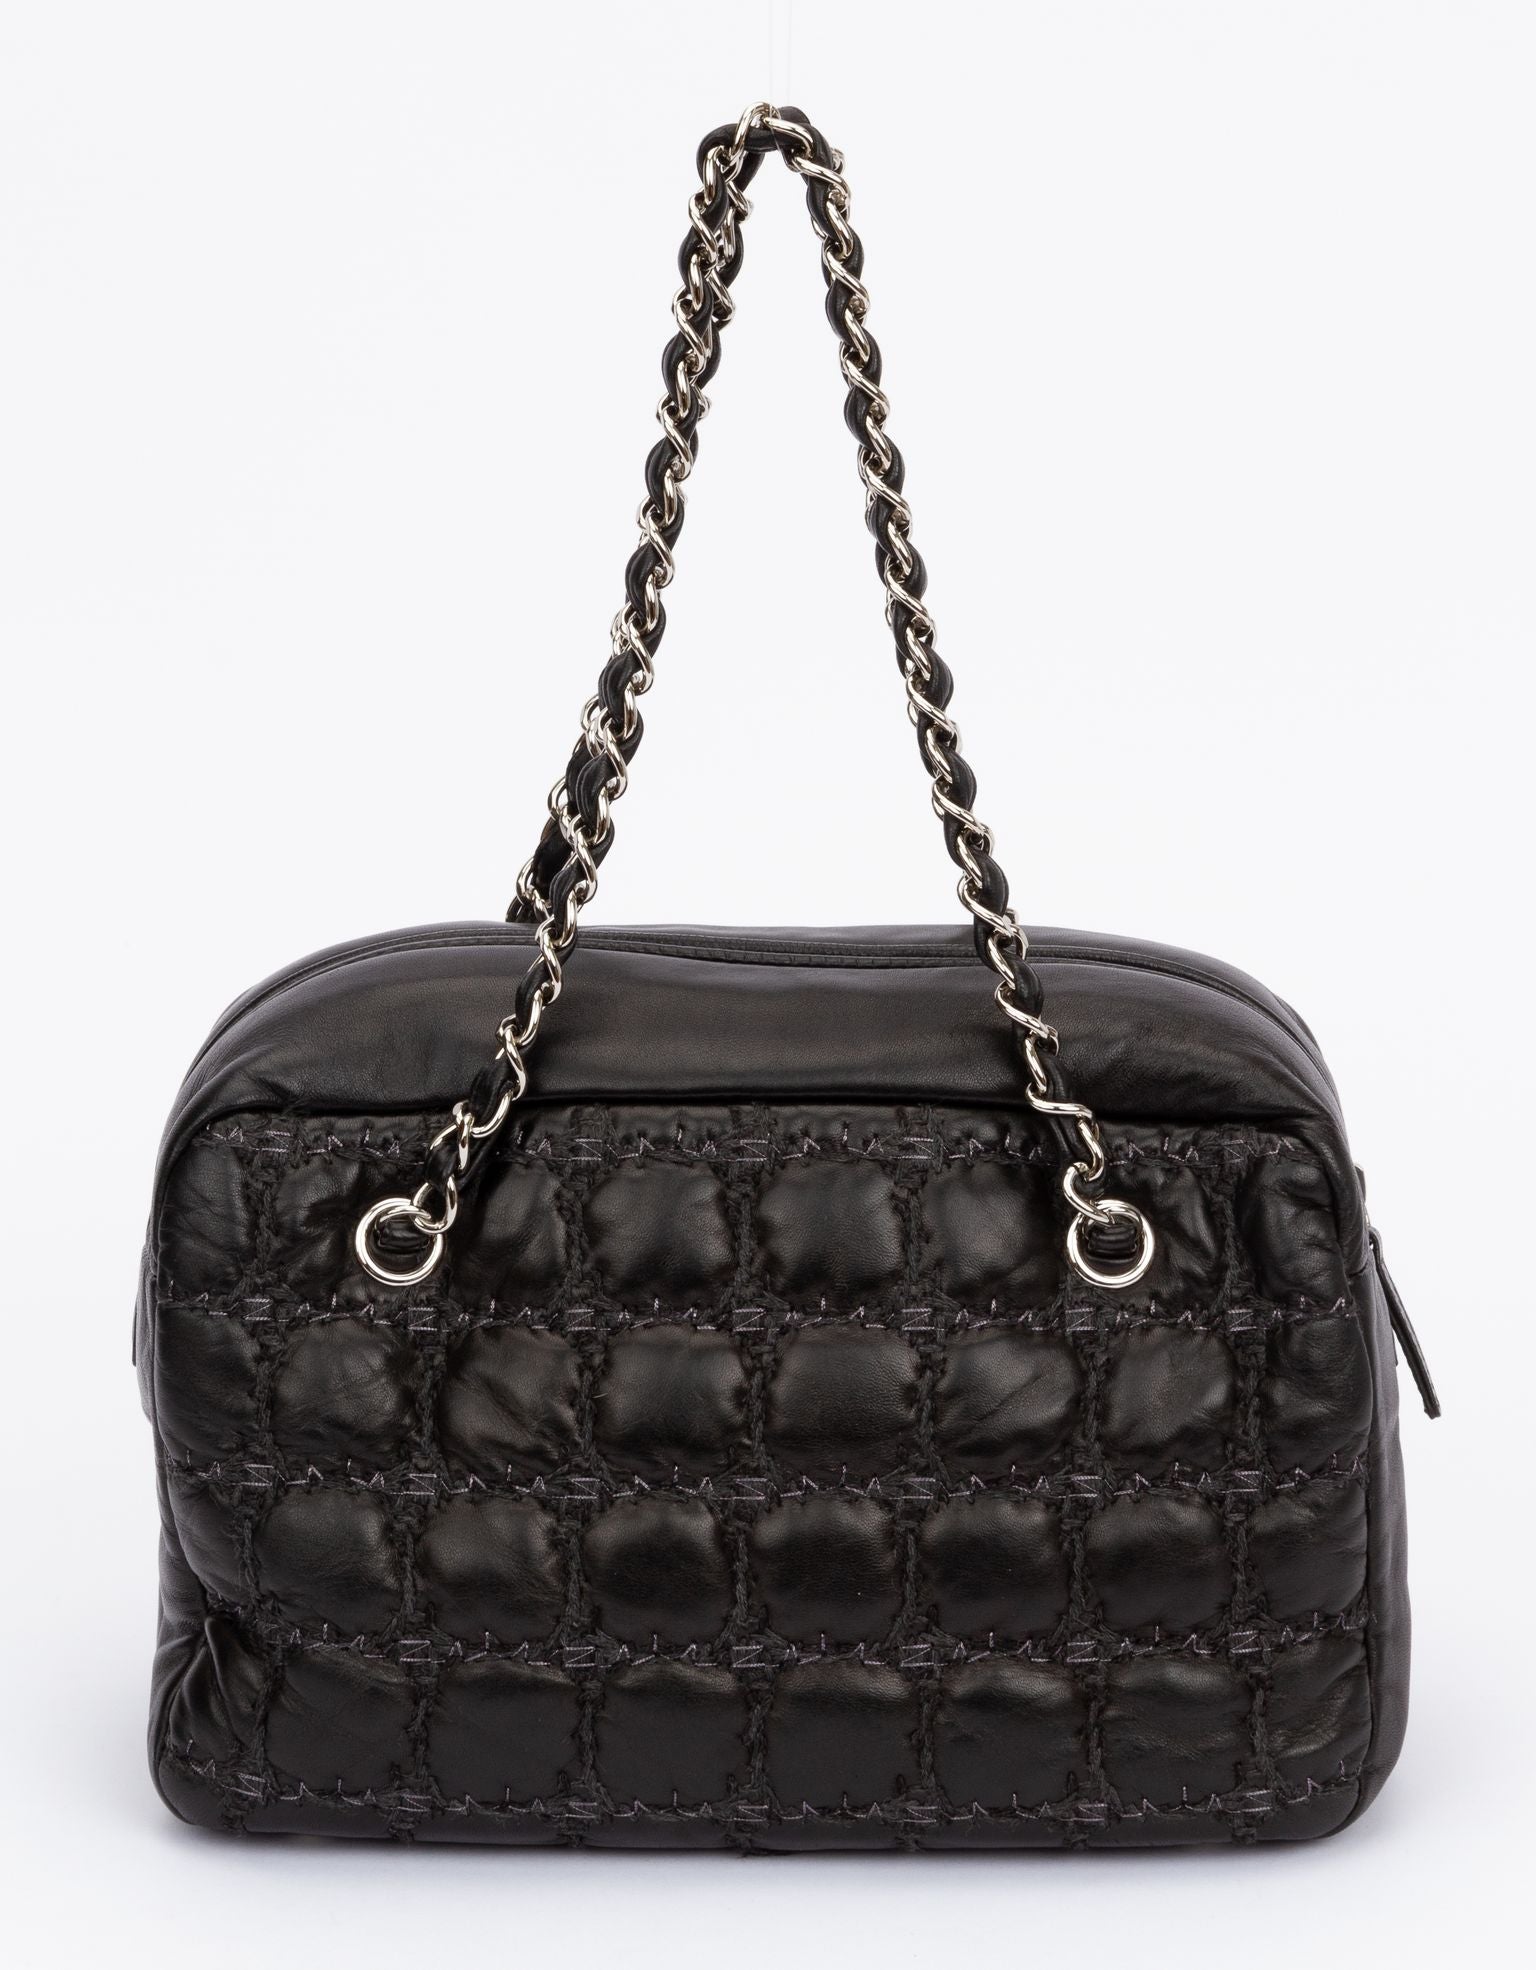 Chanel Black Bubble Quilted Nylon Accordion Shoulder Bag Chanel